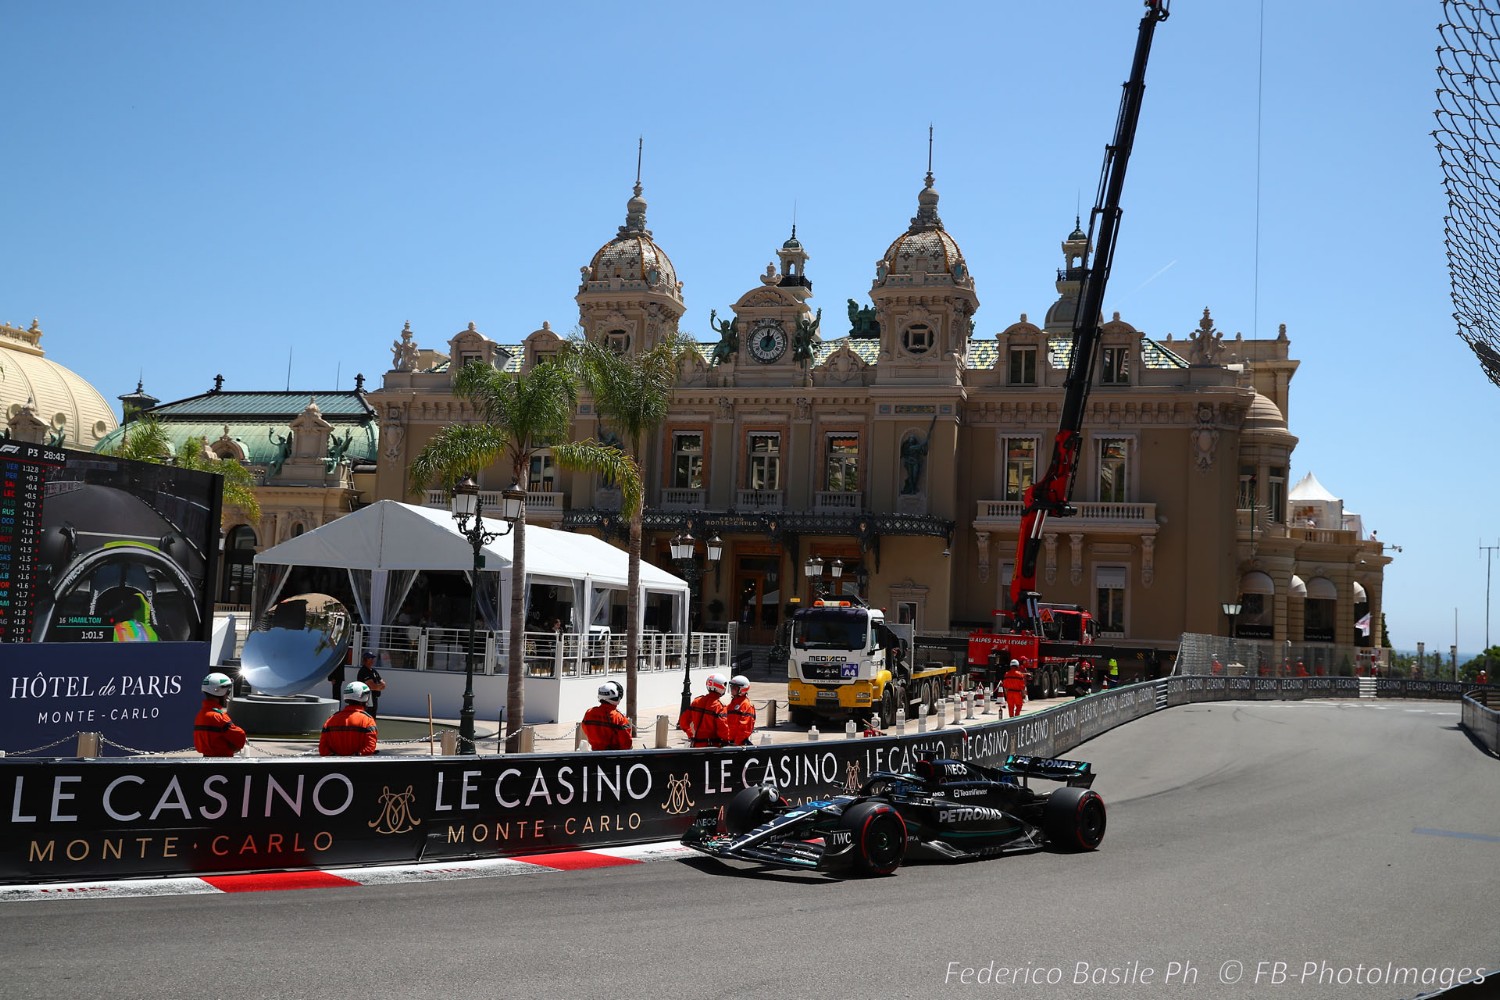 #63 George Russell, Mercedes during the Monaco GP, 25-28 May 2023 at Monte carlo, Formula 1 World championship 2023.